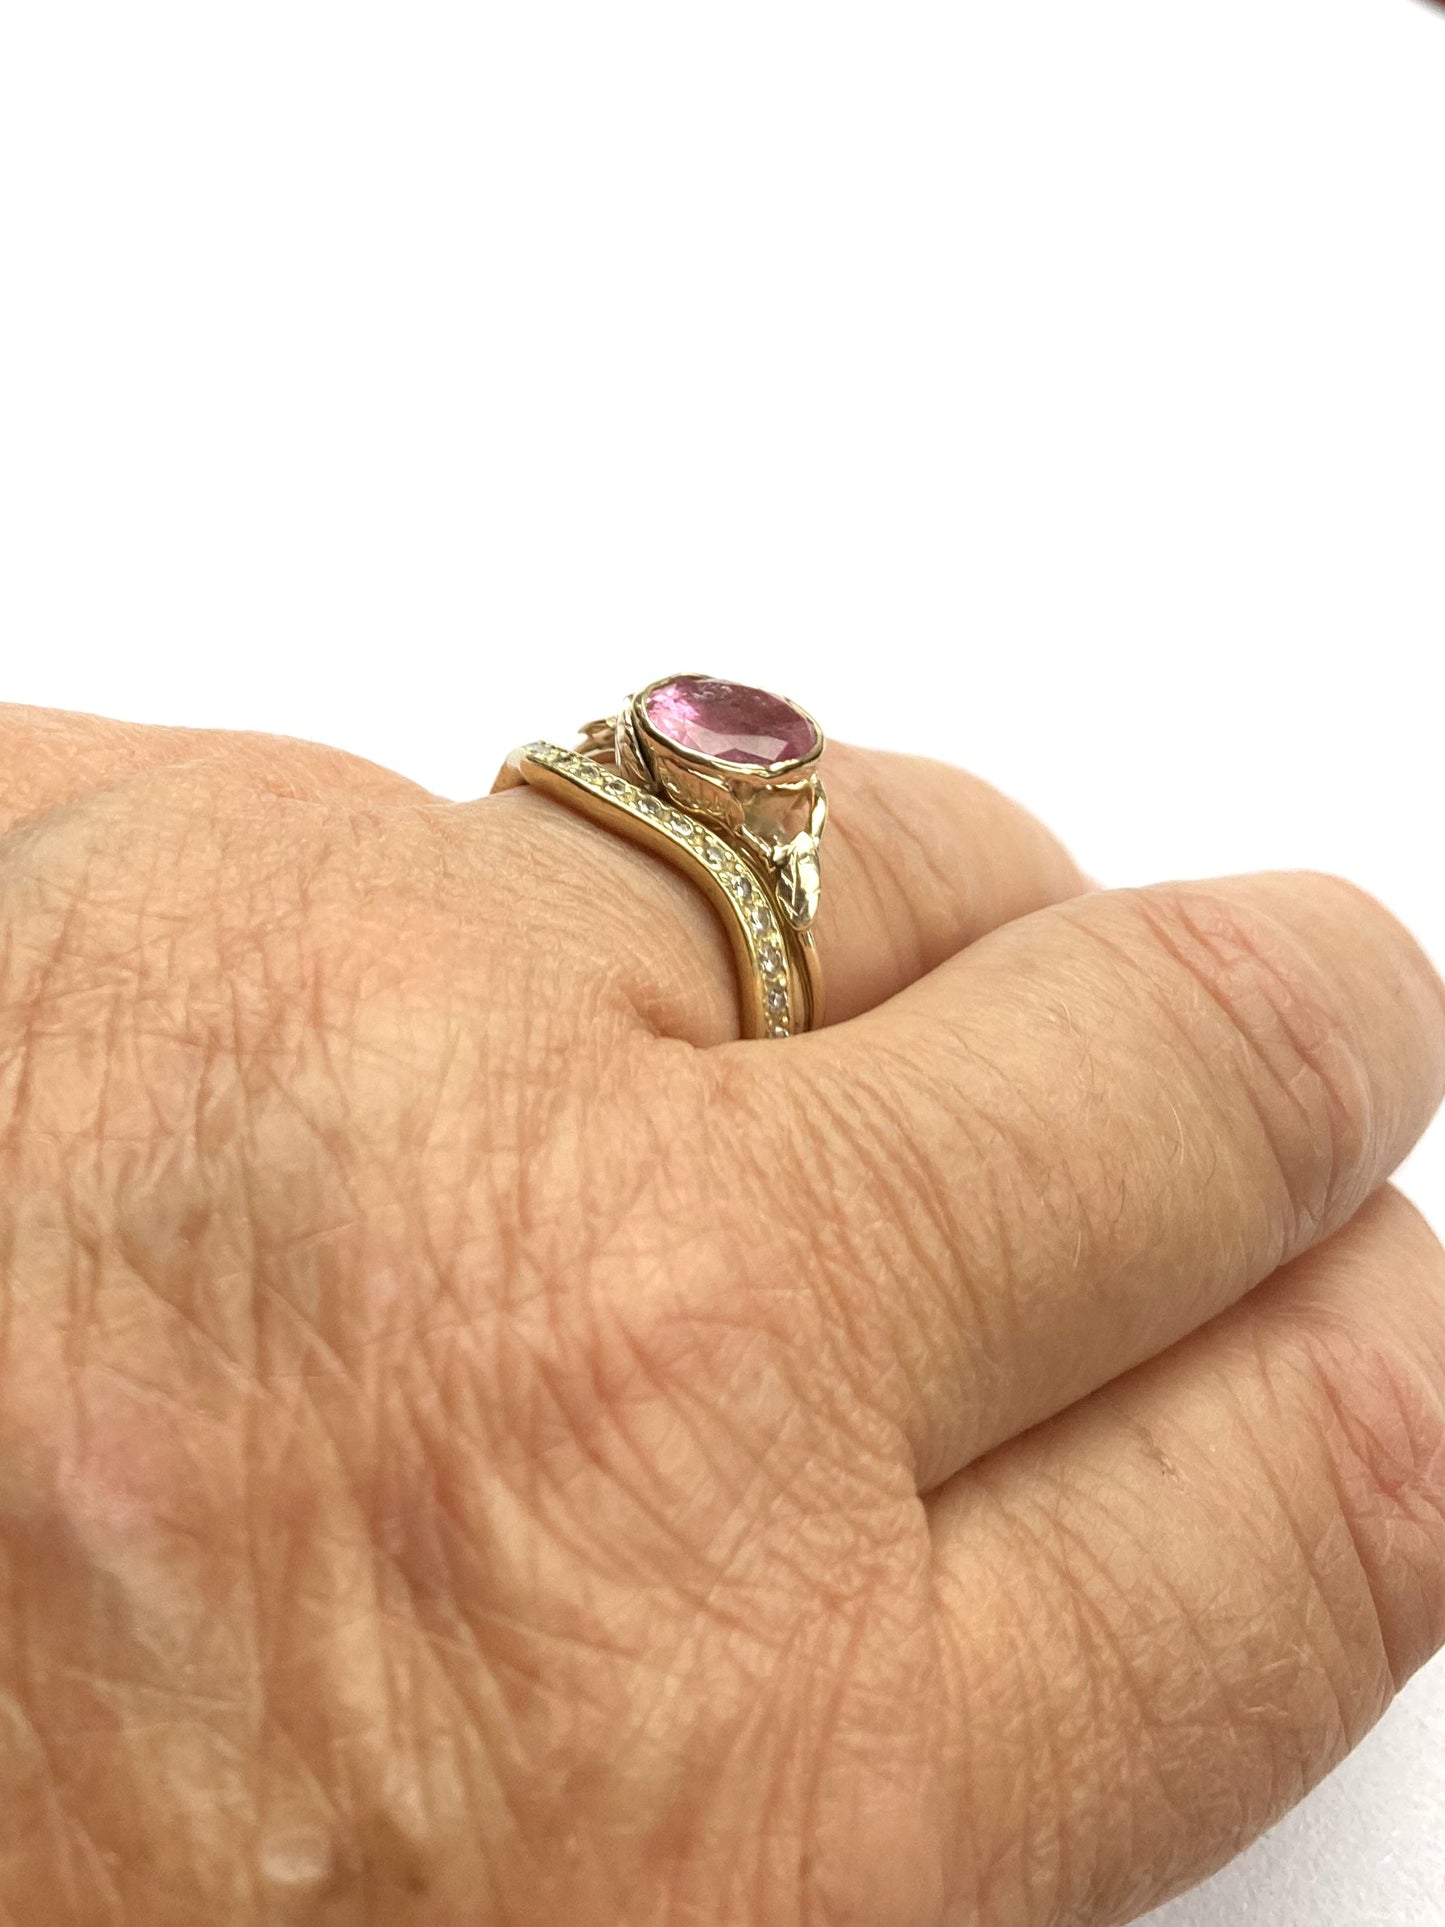 two gold rings on hand, one with large oval pink stone